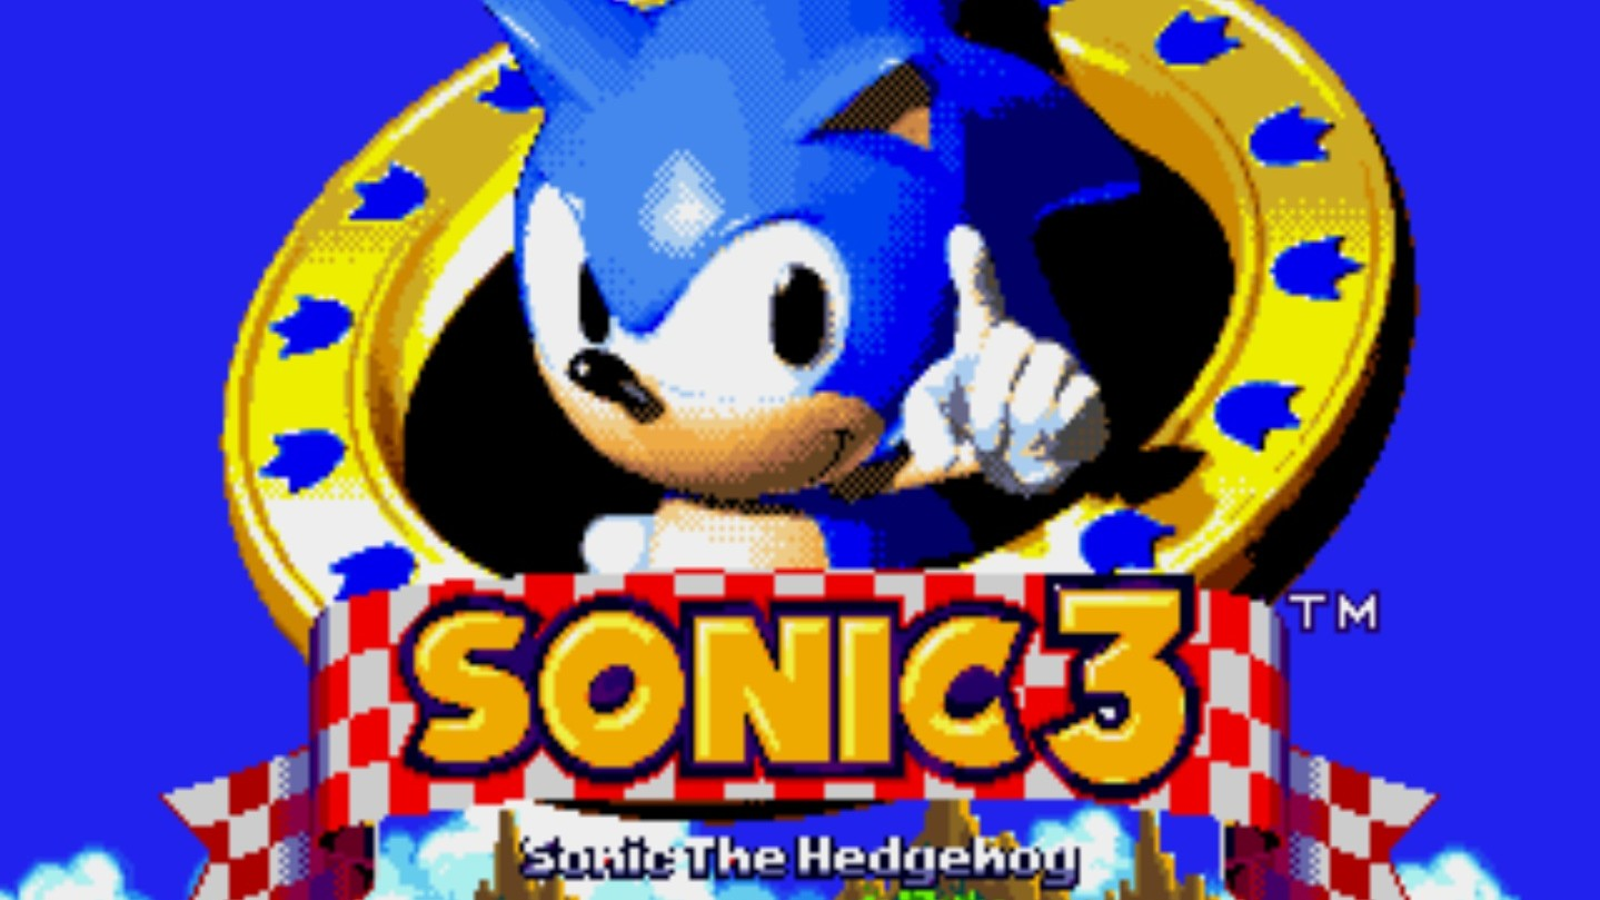 Seriously though, Sonic 3 AIR is the best way to play Sonic 3